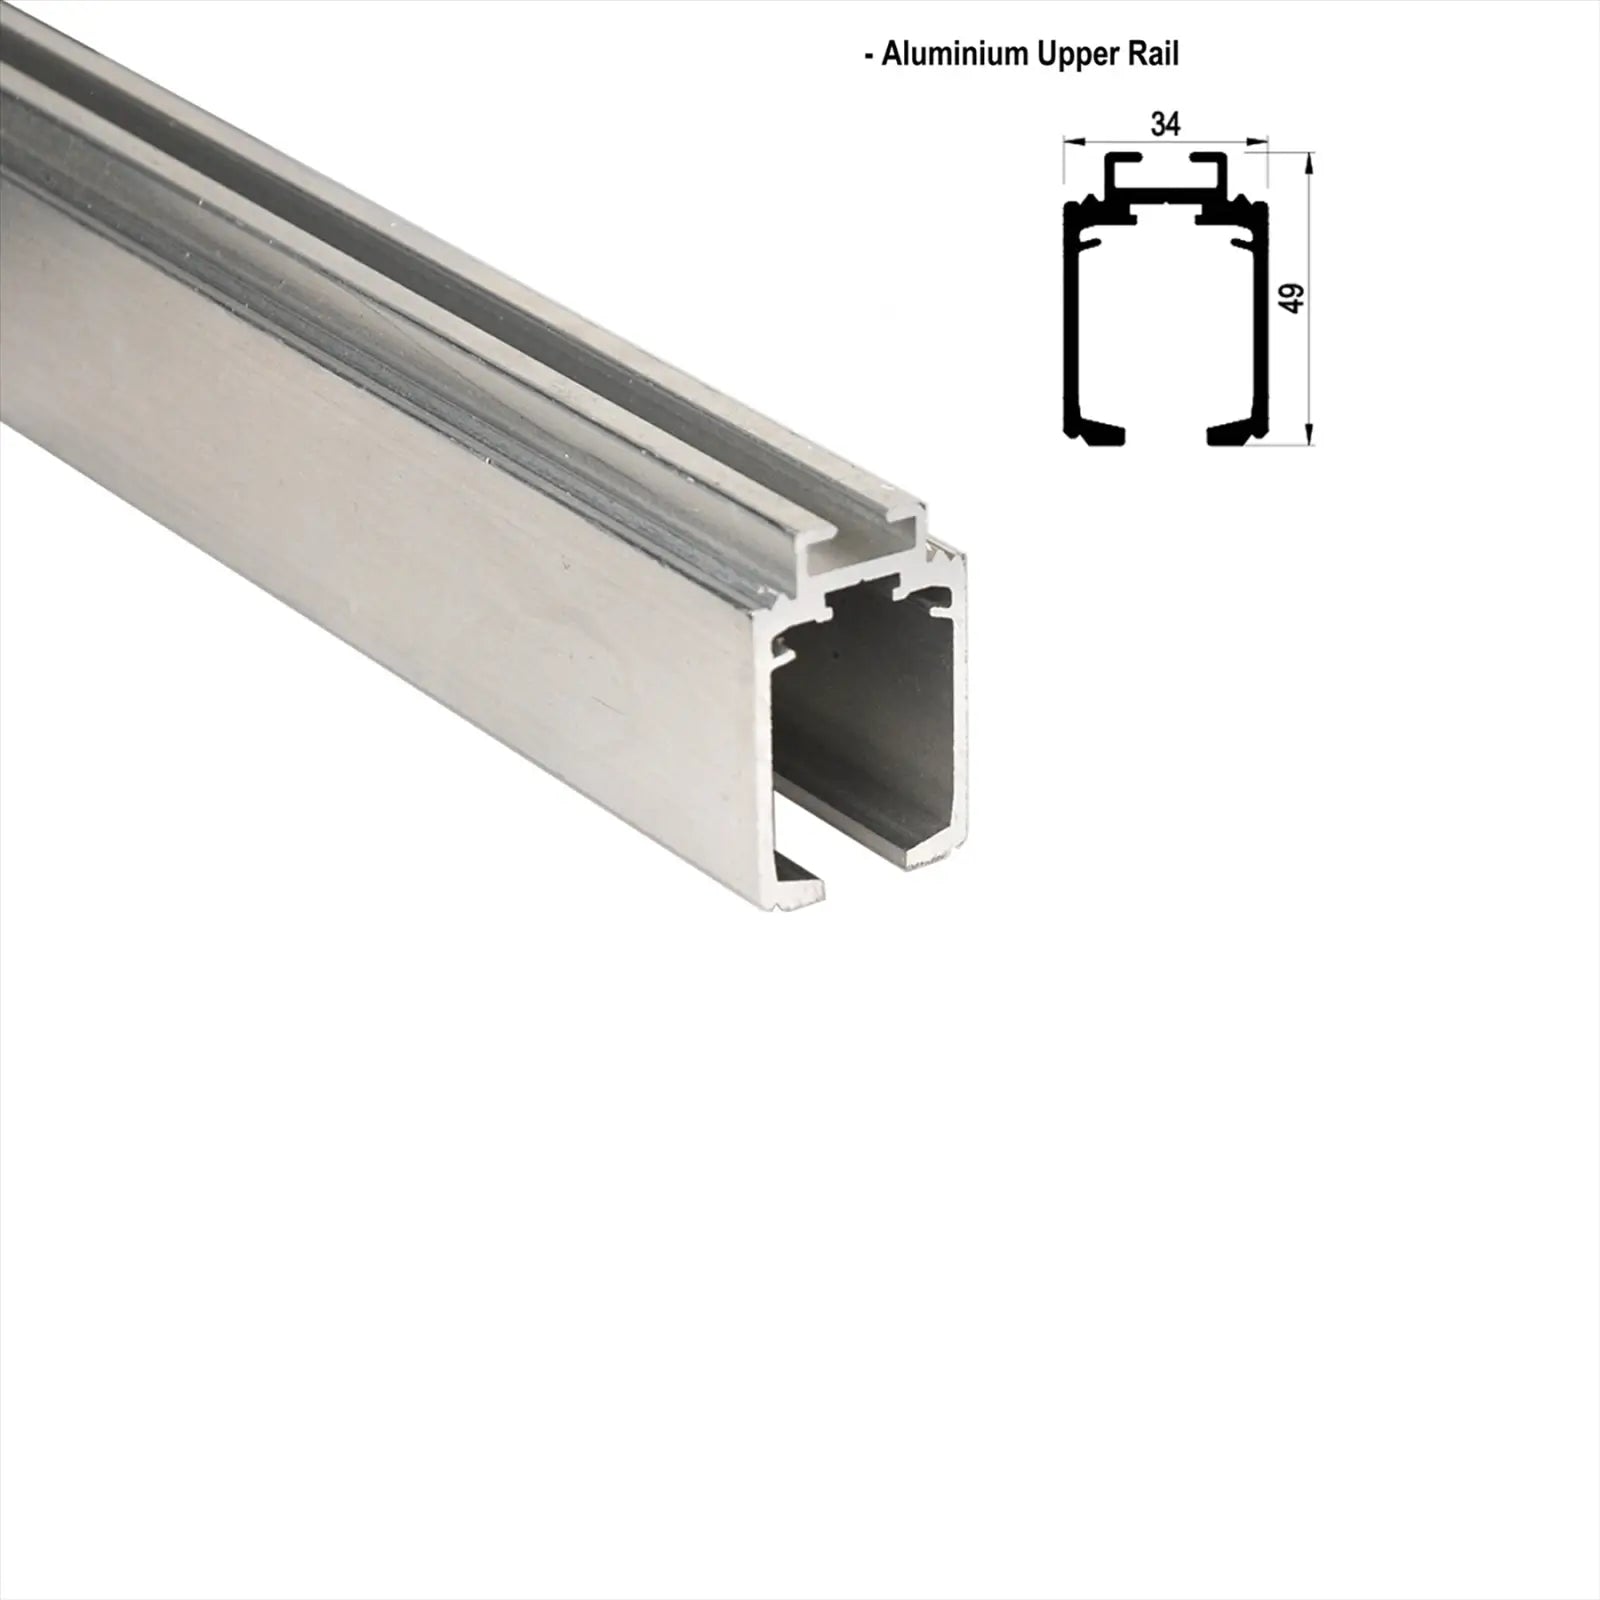 GS-Slide Top Hung Glass Sliding Door Kit - 2400mm Track - One Way Soft Close - Decor And Decor